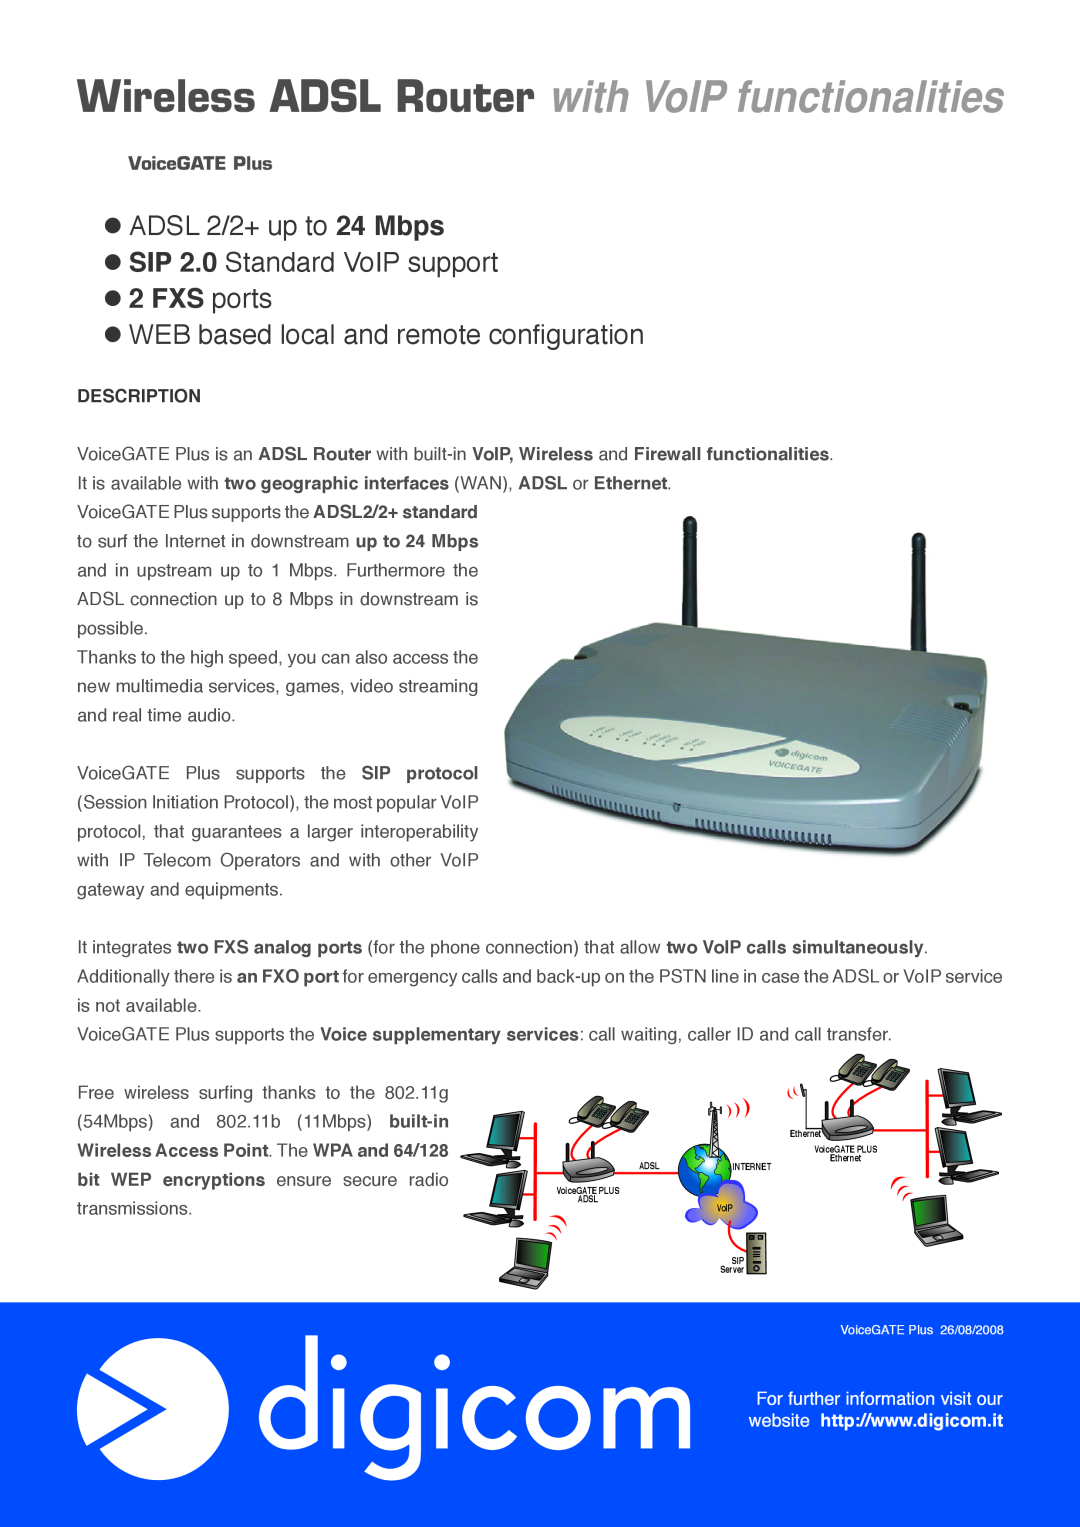 Digicom manual Description, Wireless ADSL Router with VoIP functionalities, FXS ports, VoiceGATE Plus 